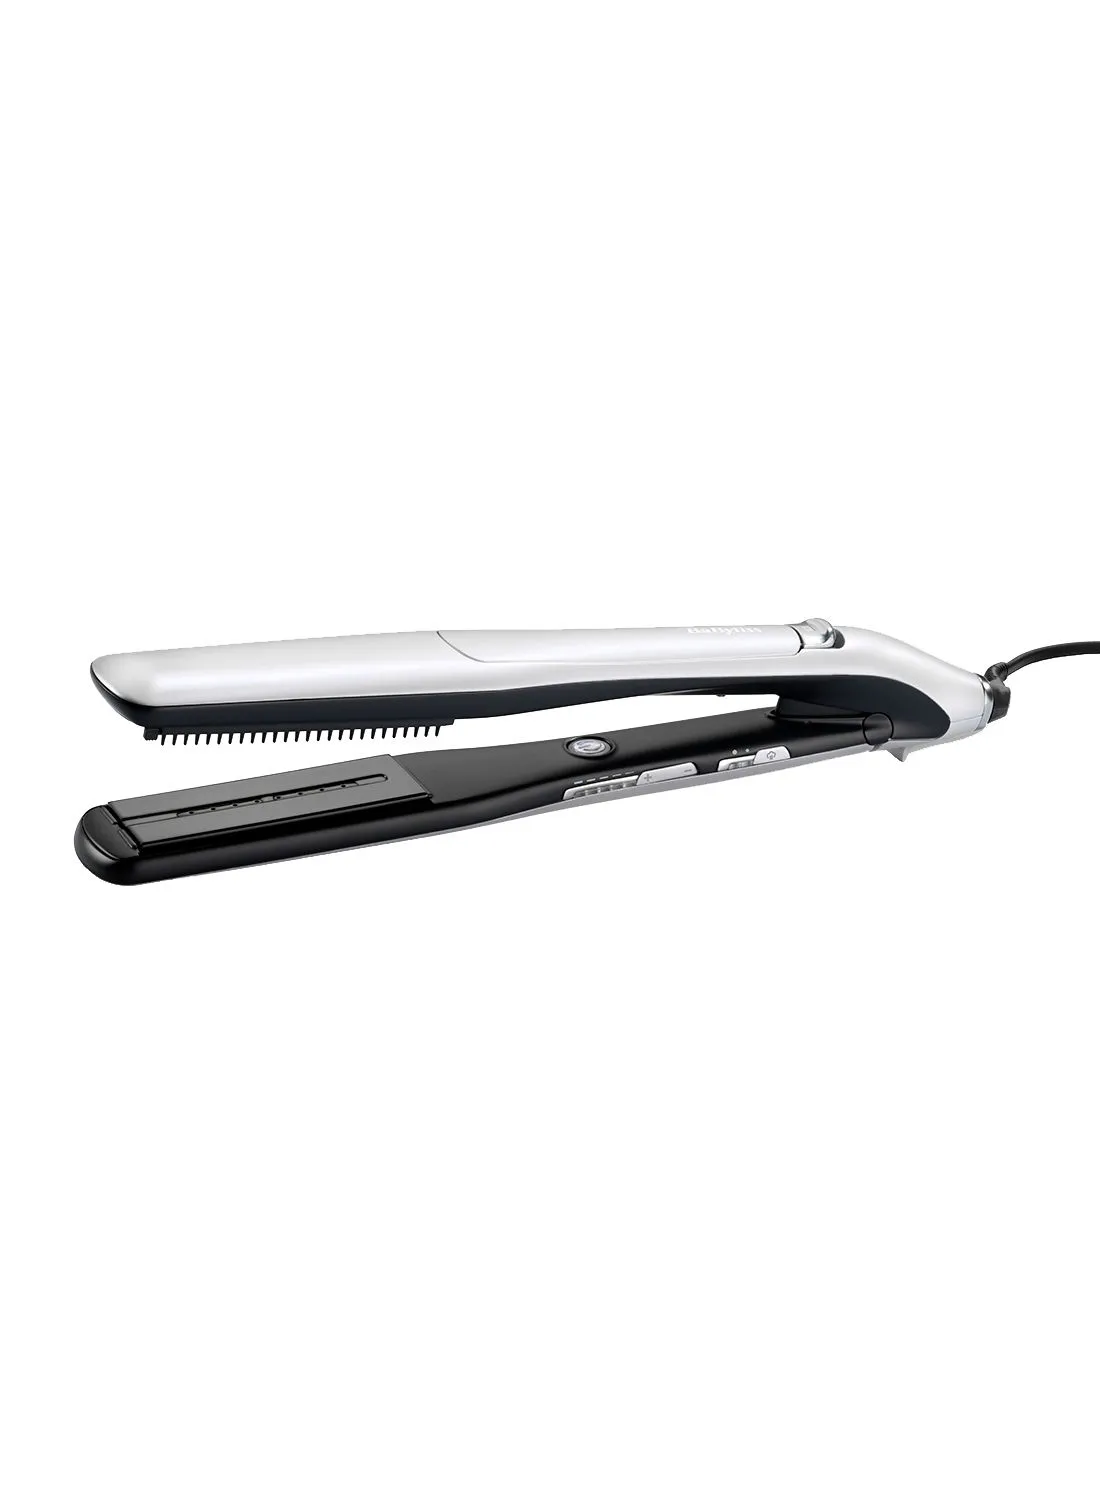 babyliss Steam Lustre Professional Hair Straightener | Advanced Ceramic 36mm Broad Heating Plate | 5 Heat Settings From 170-210°C | 360° Surround Steam Technology For Smooth Hair | ST595SDE Silver